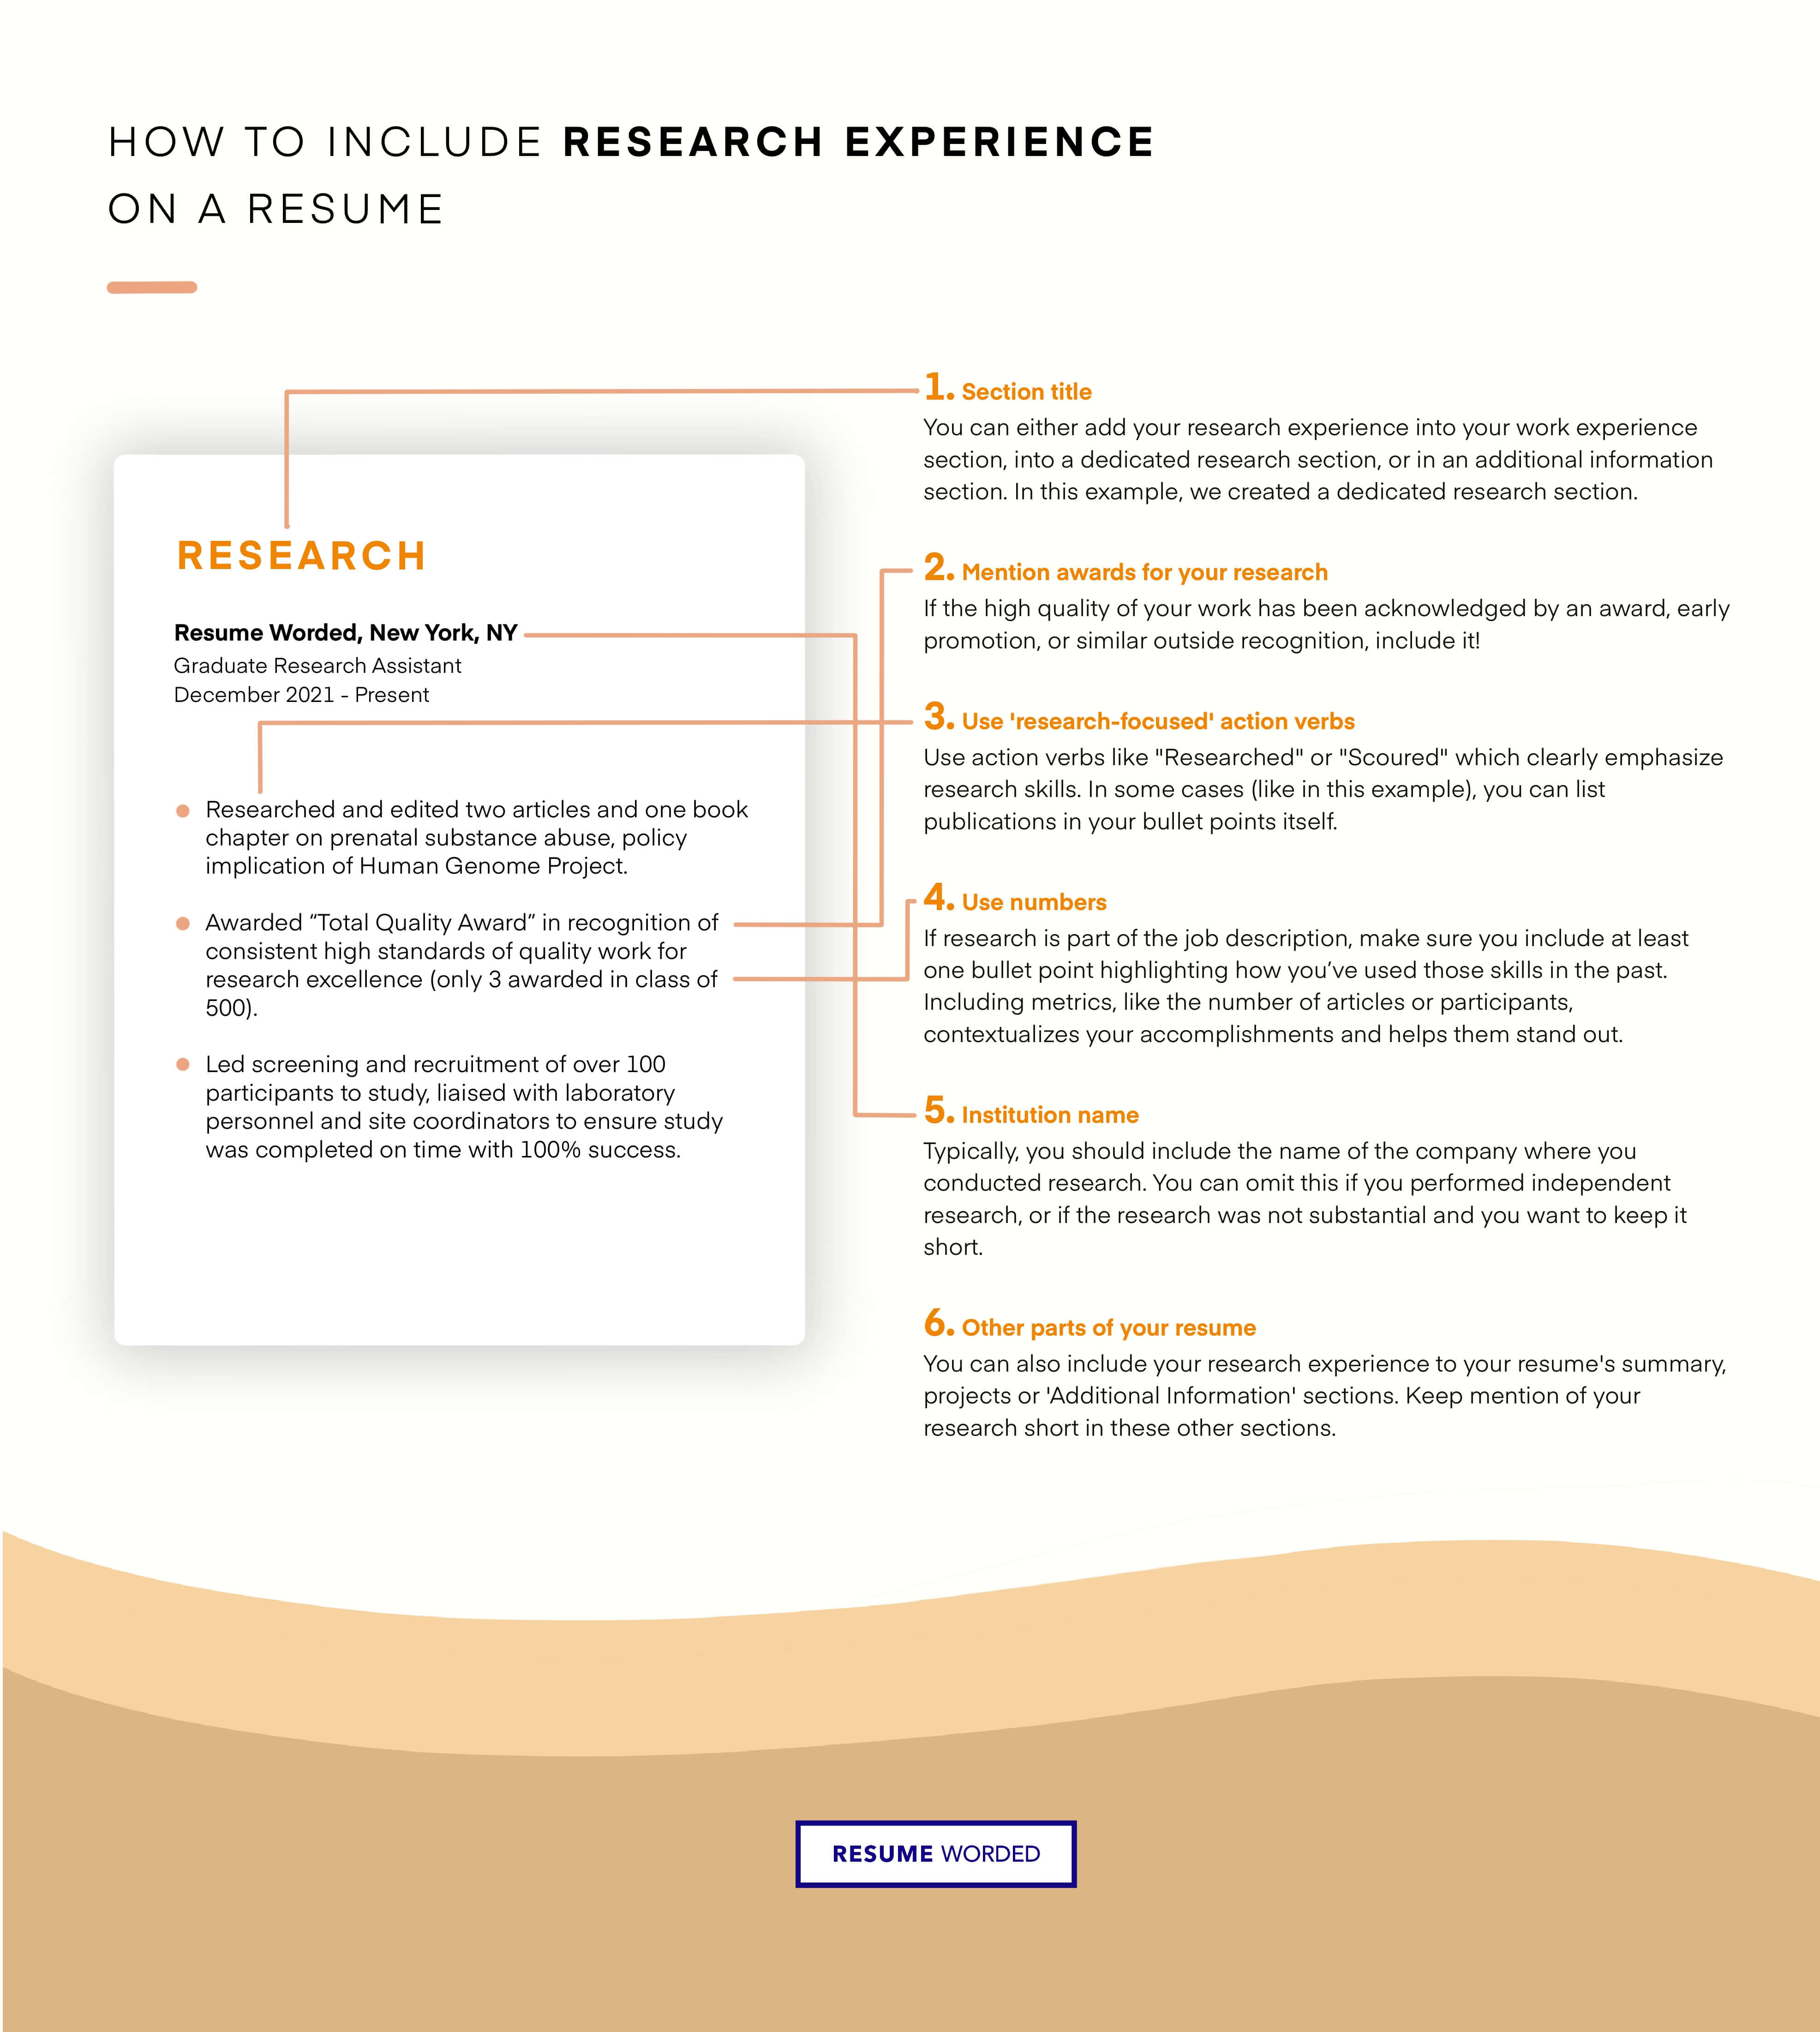 Include research and analysis experience in related industries. - Equity Research Associate Resume